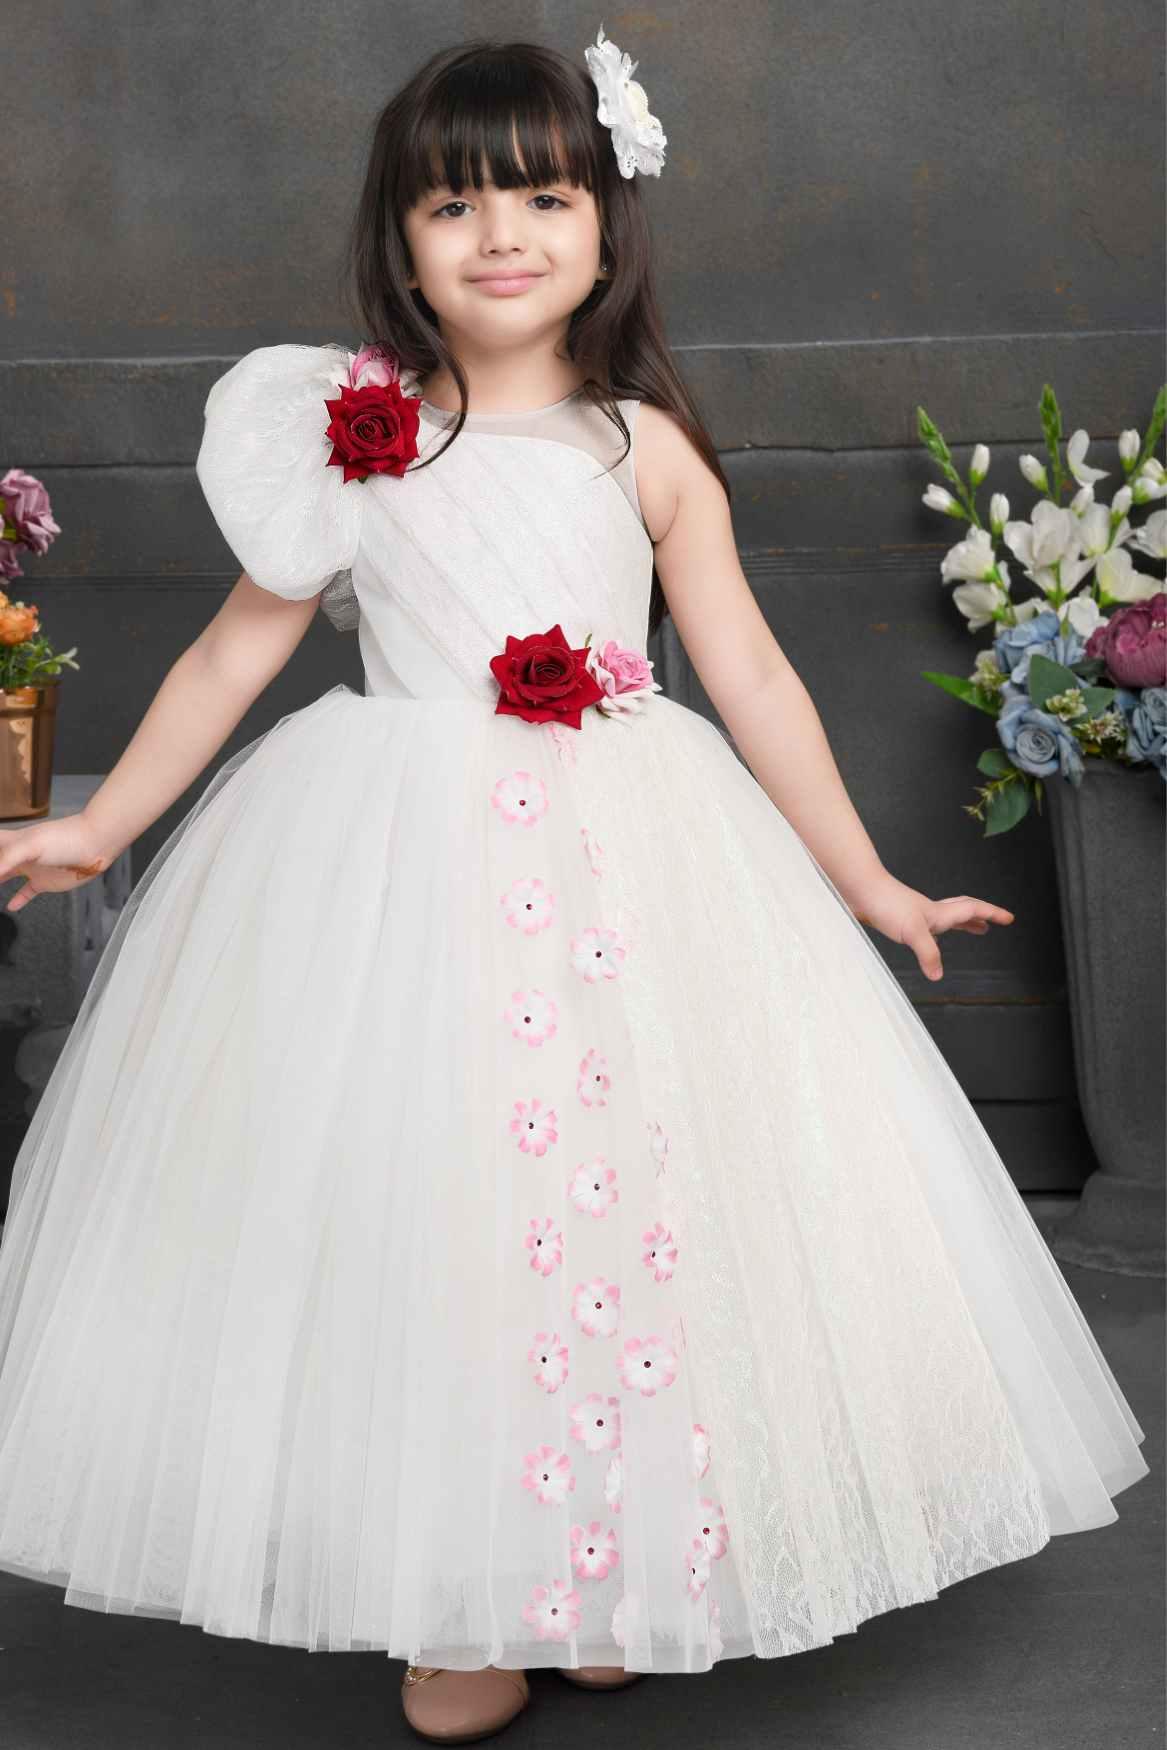 Designer White Gown With Floral Embellishments For Girls - Lagorii Kids